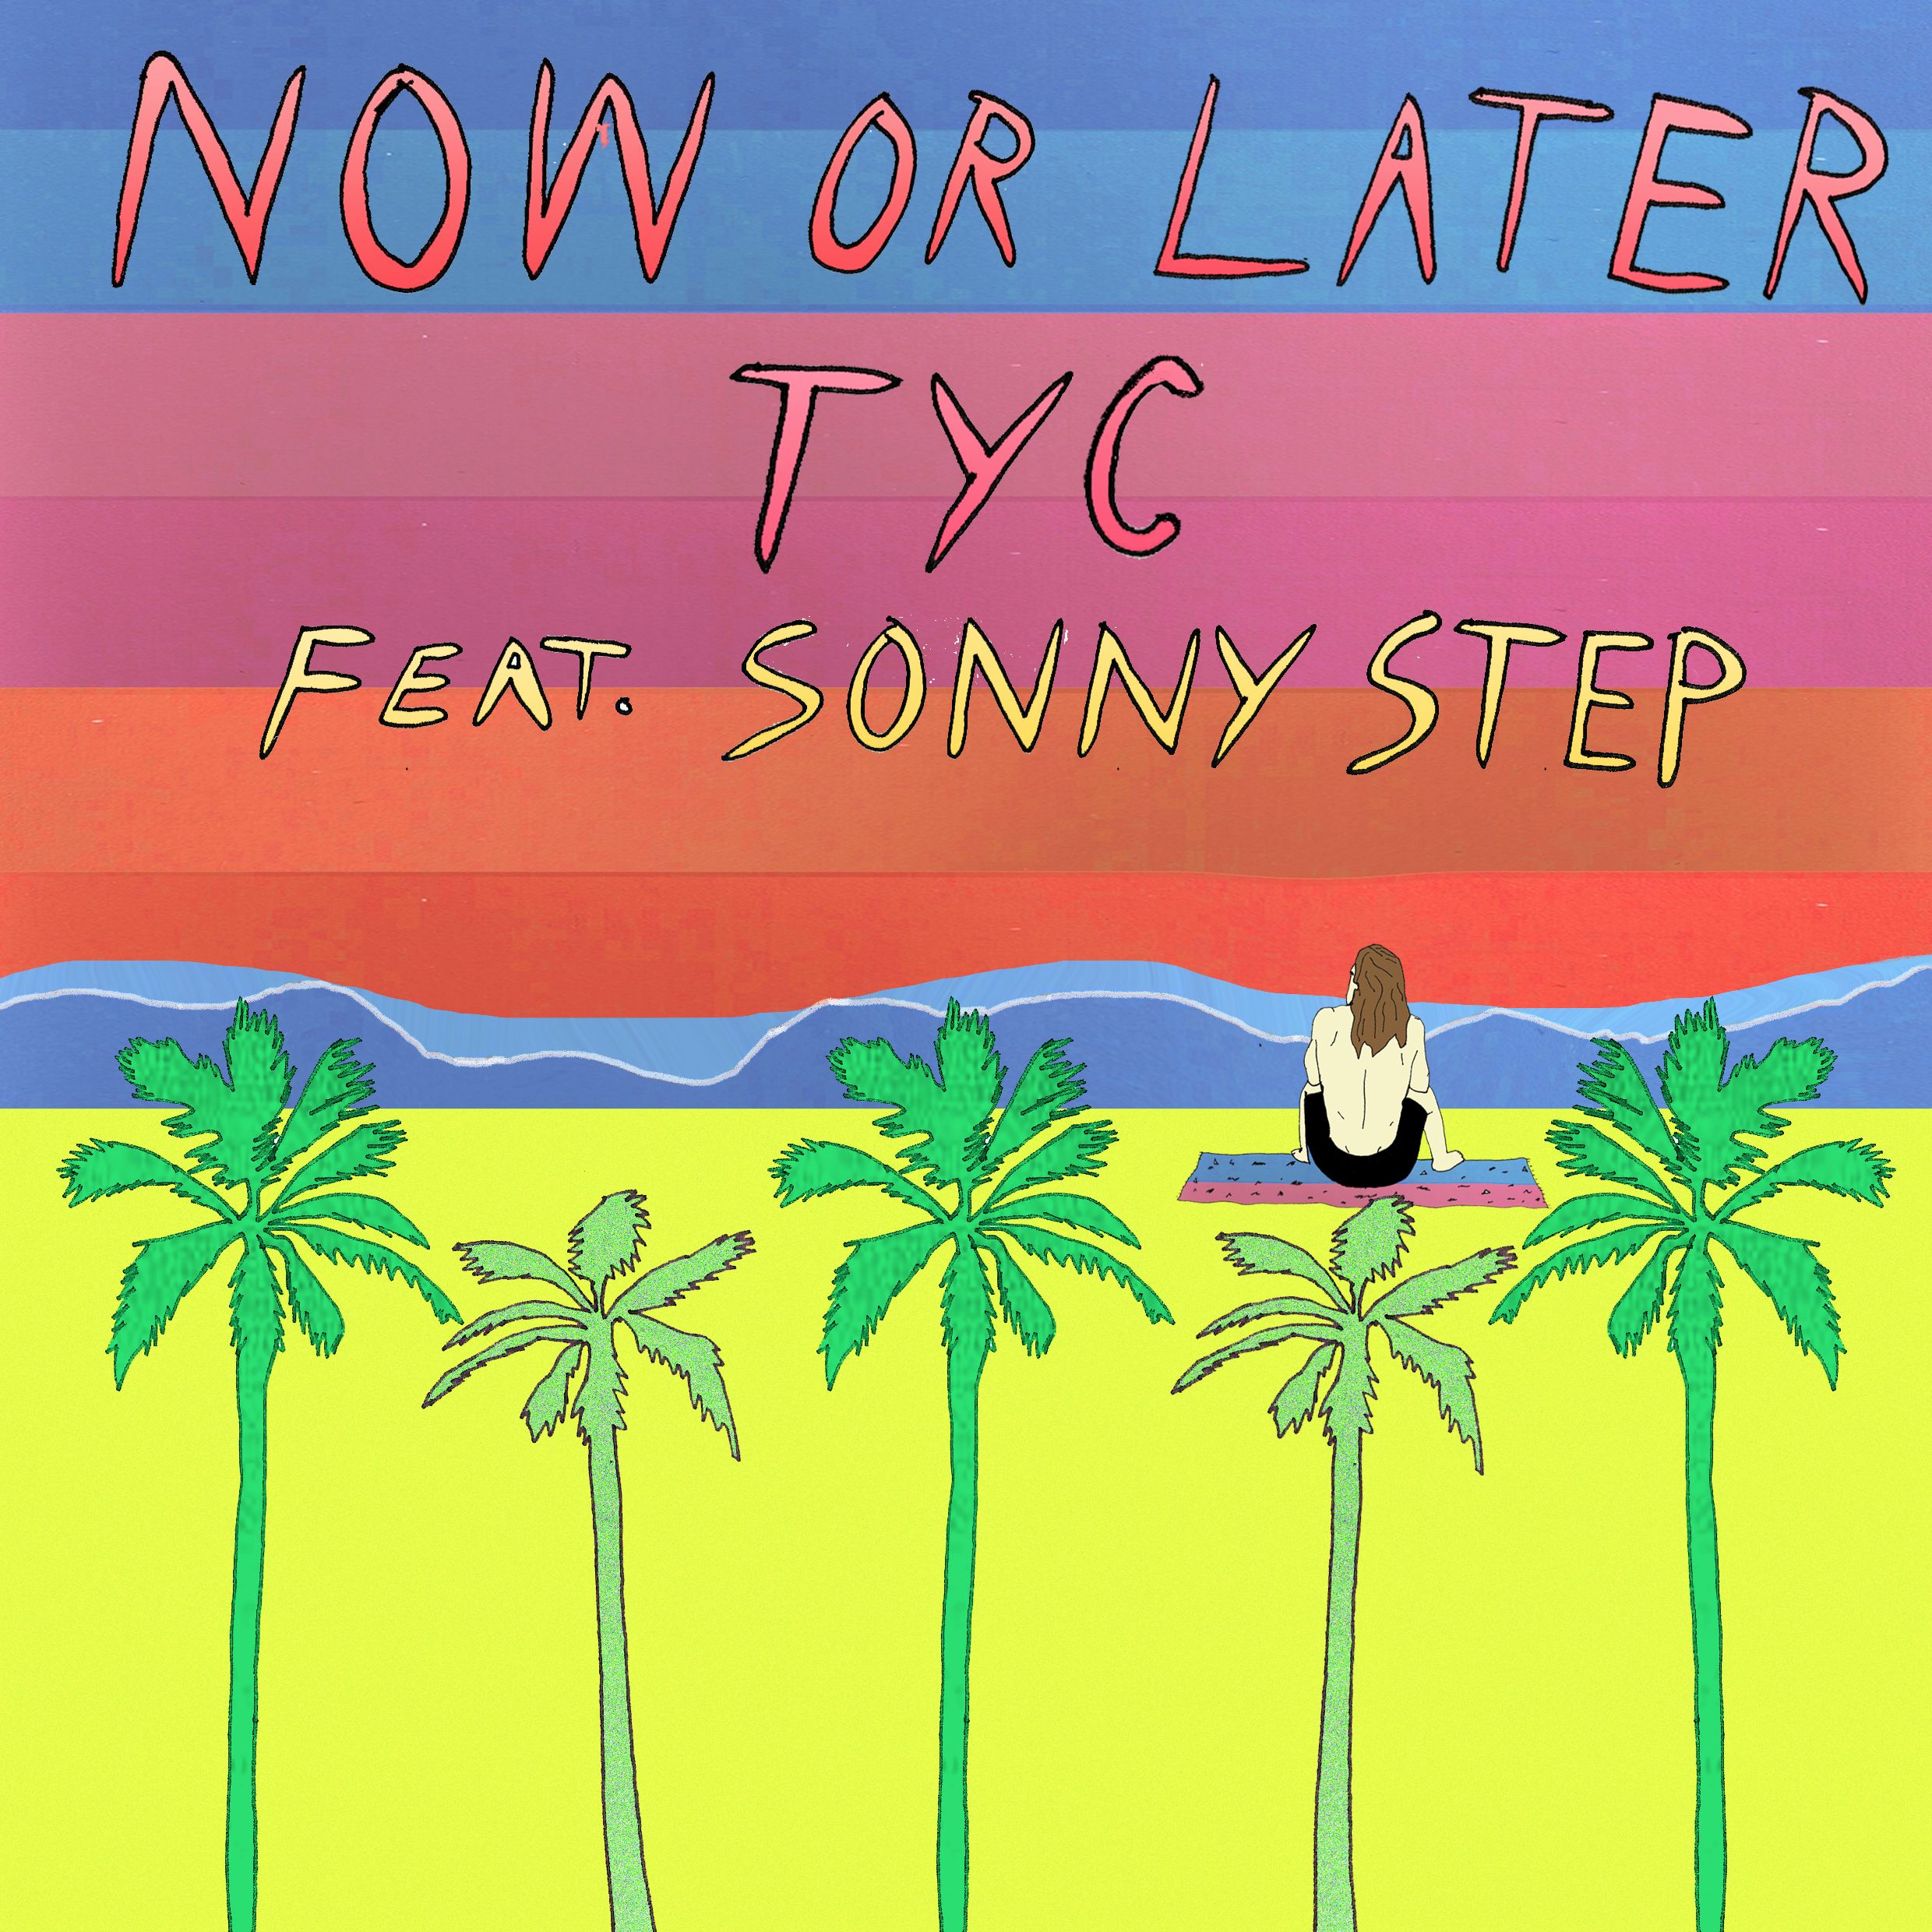 TyC – “Now Or Later” Feat. Sonny Step